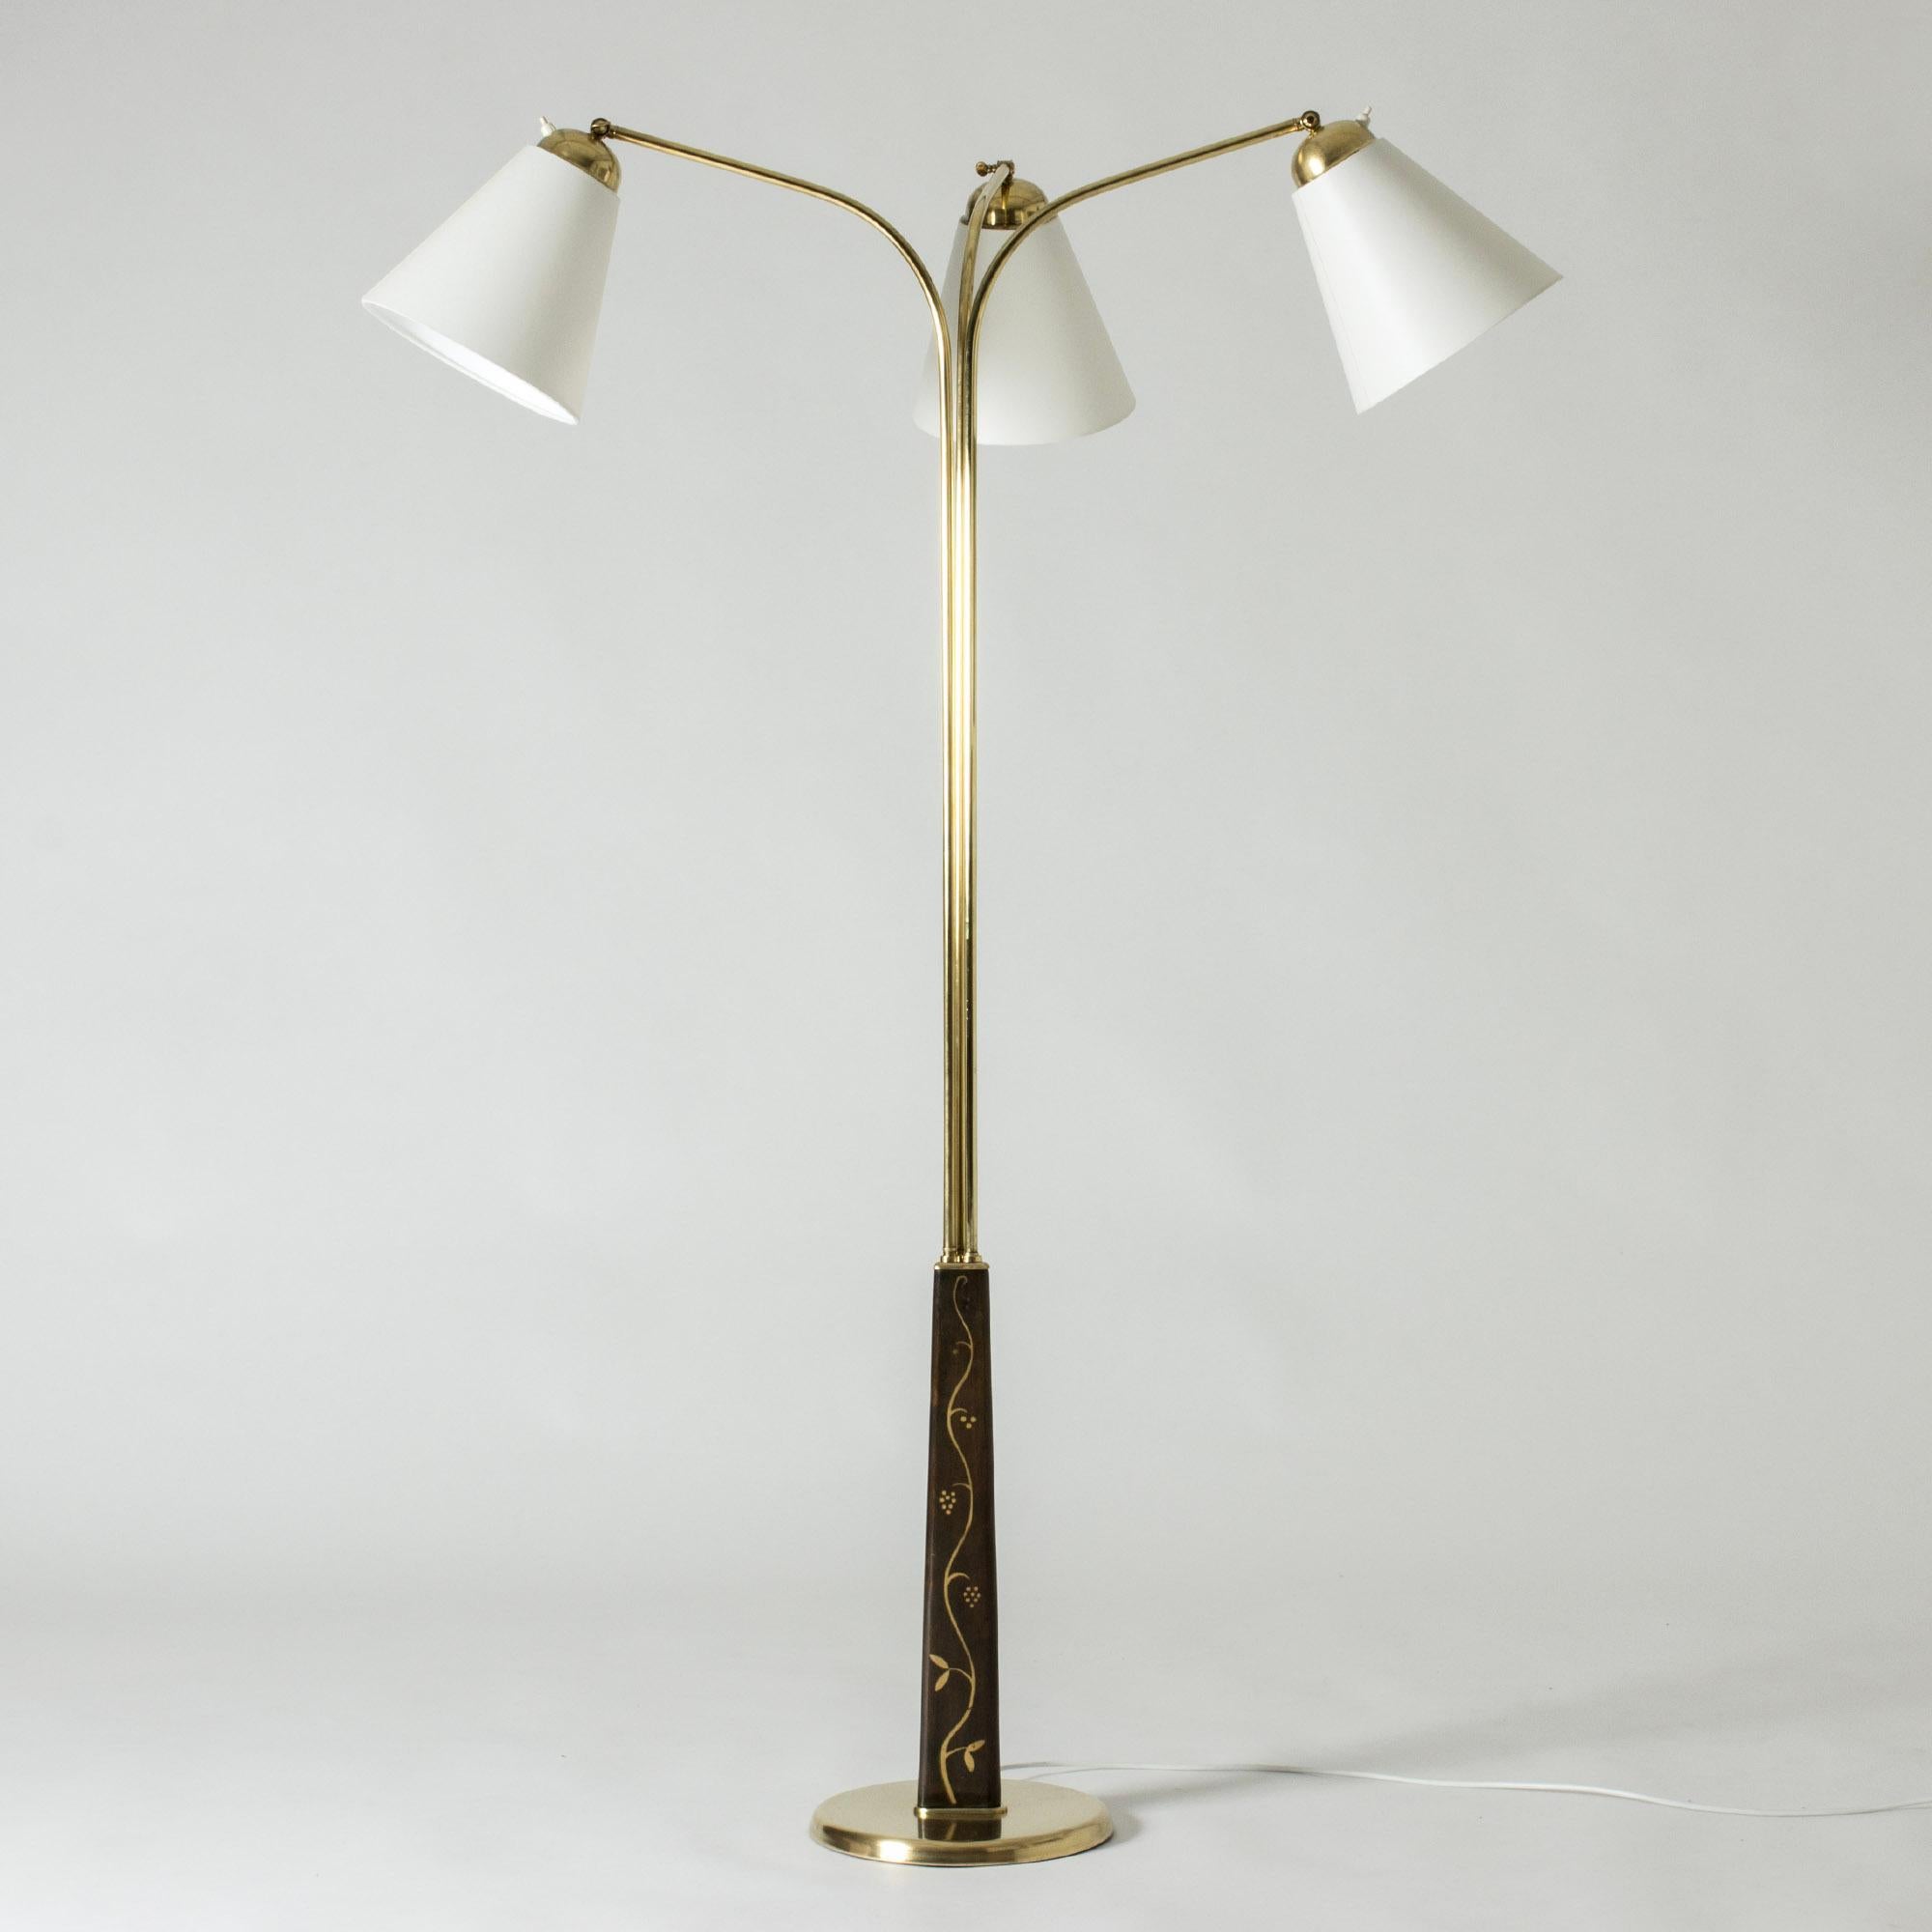 Elegant Swedish Modern floor lamp by Tor Wolfenstein, made from brass with three lamp shades. Tapering wooden base with painted decor of flowers and leaves. The direction of the lamp shades can be adjusted.